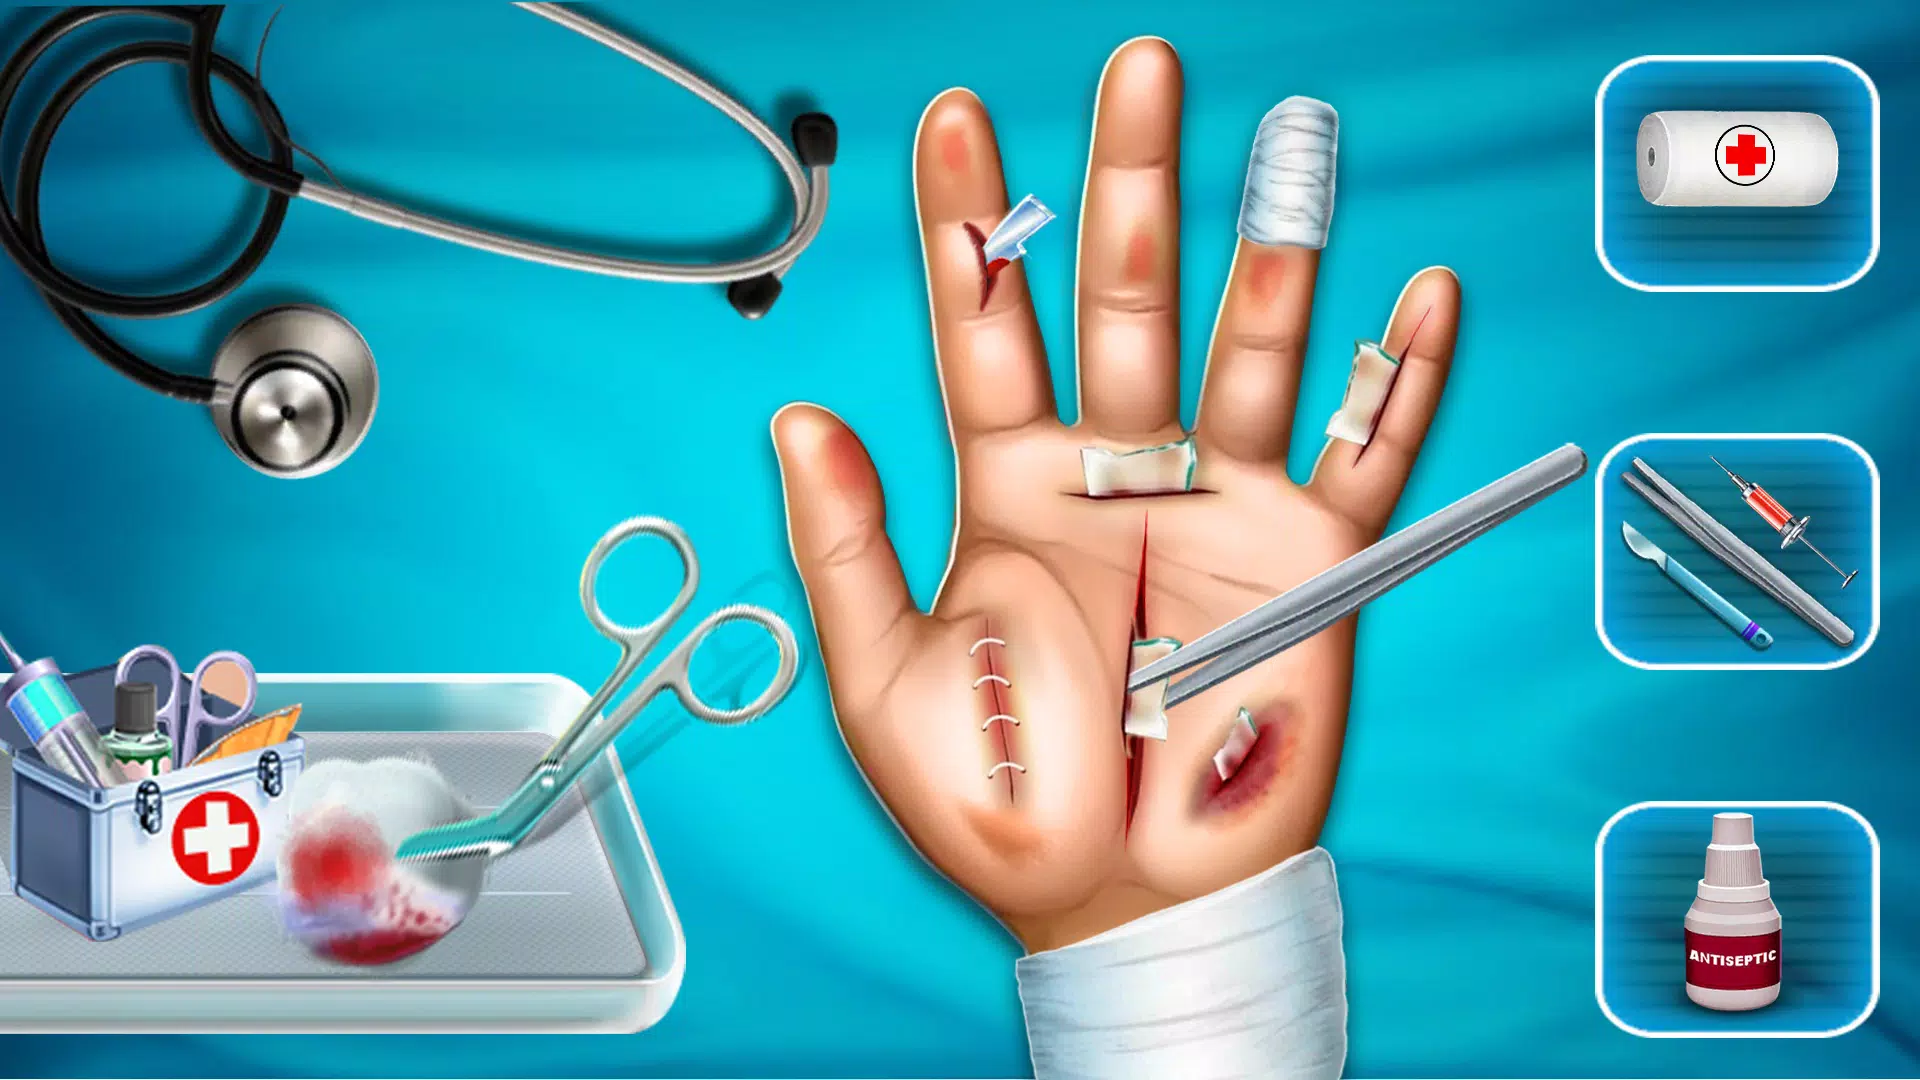 Doctor Simulator Medical Games APK for Android Download